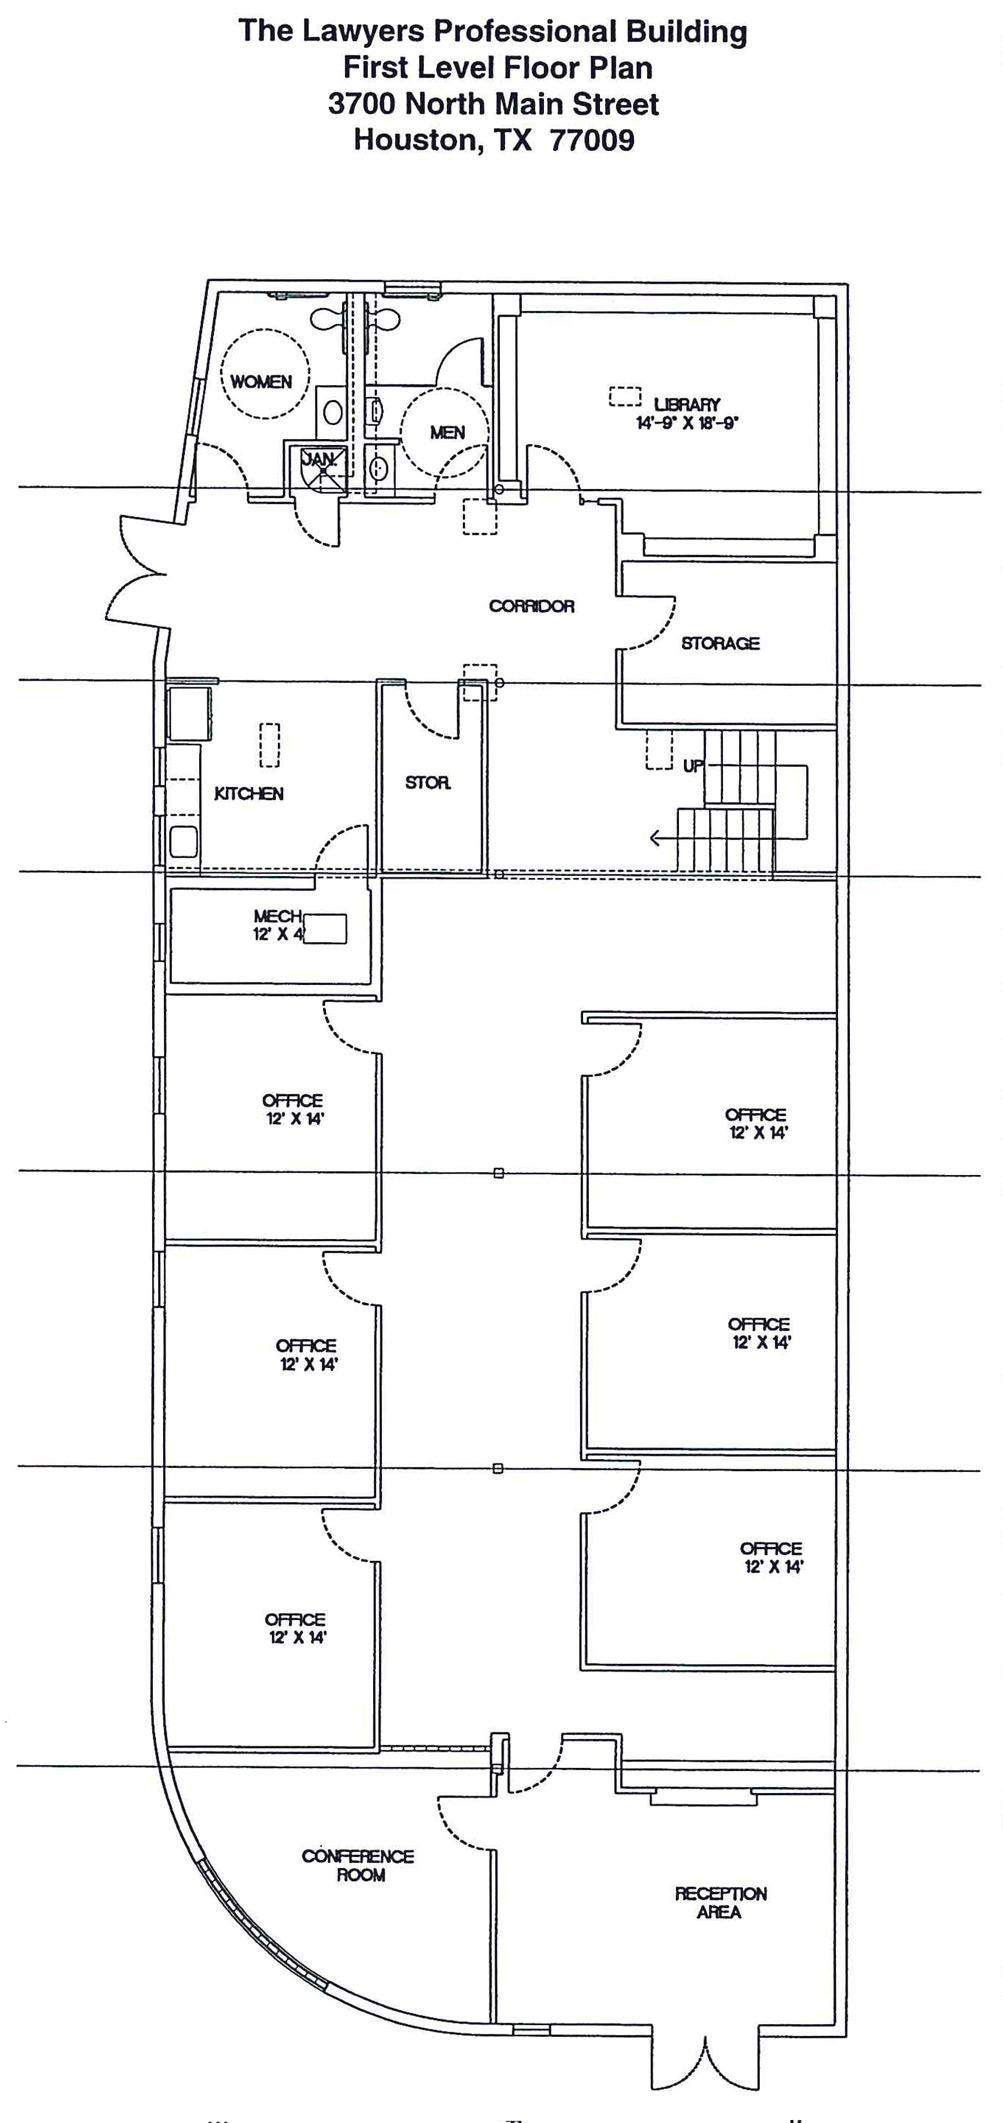 Lawyers Professional Building First Floorplan